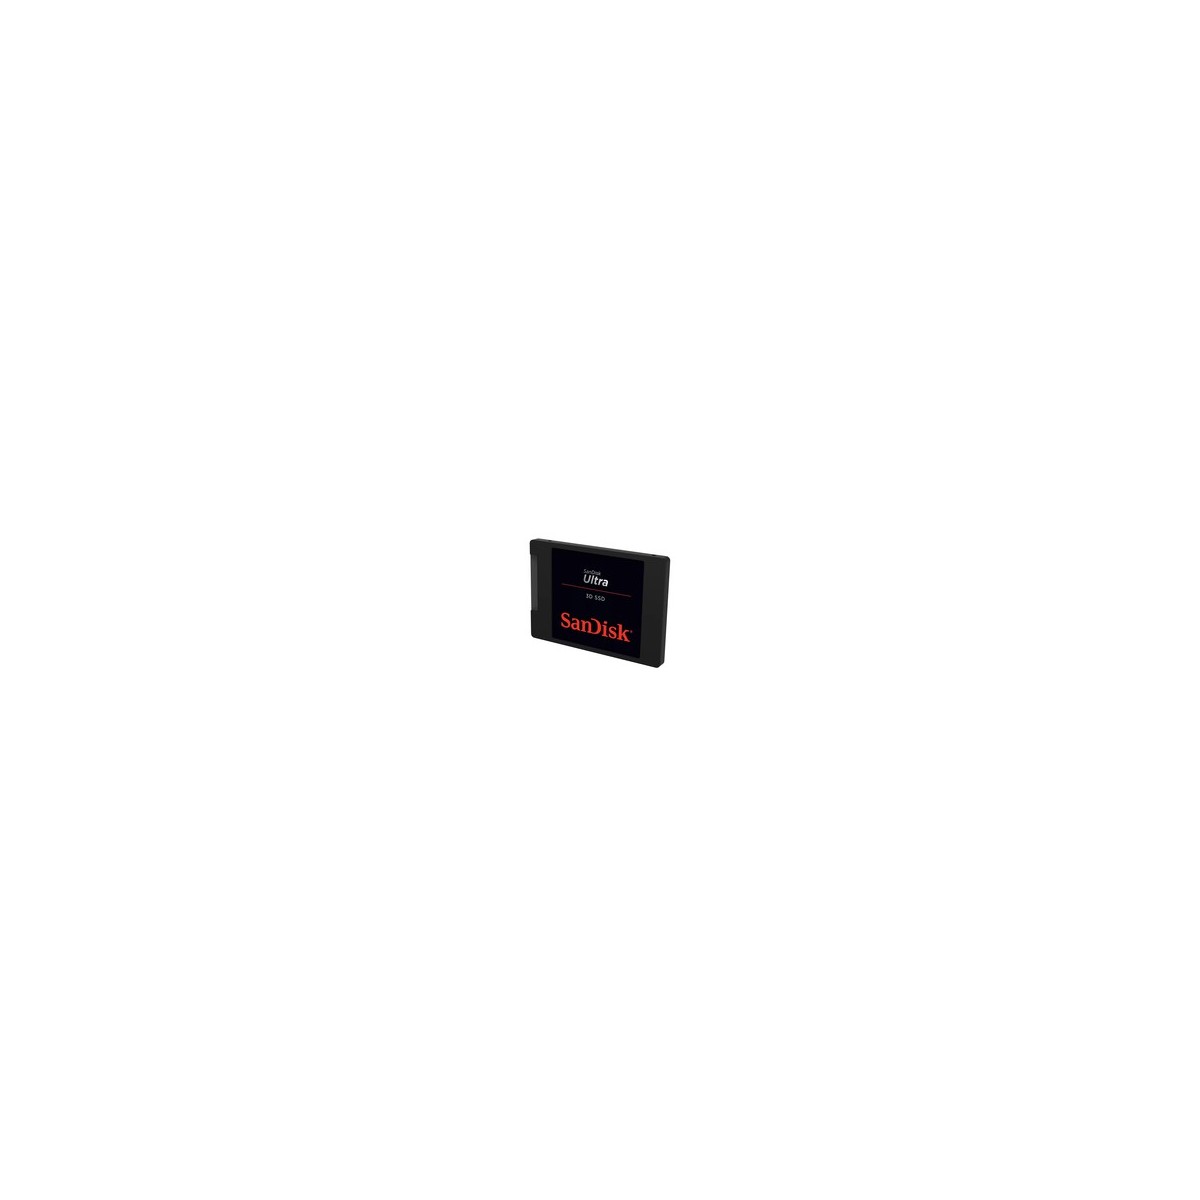 SanDisk Ultra 3D SSD 4TB - Solid State Disk - Serial ATA